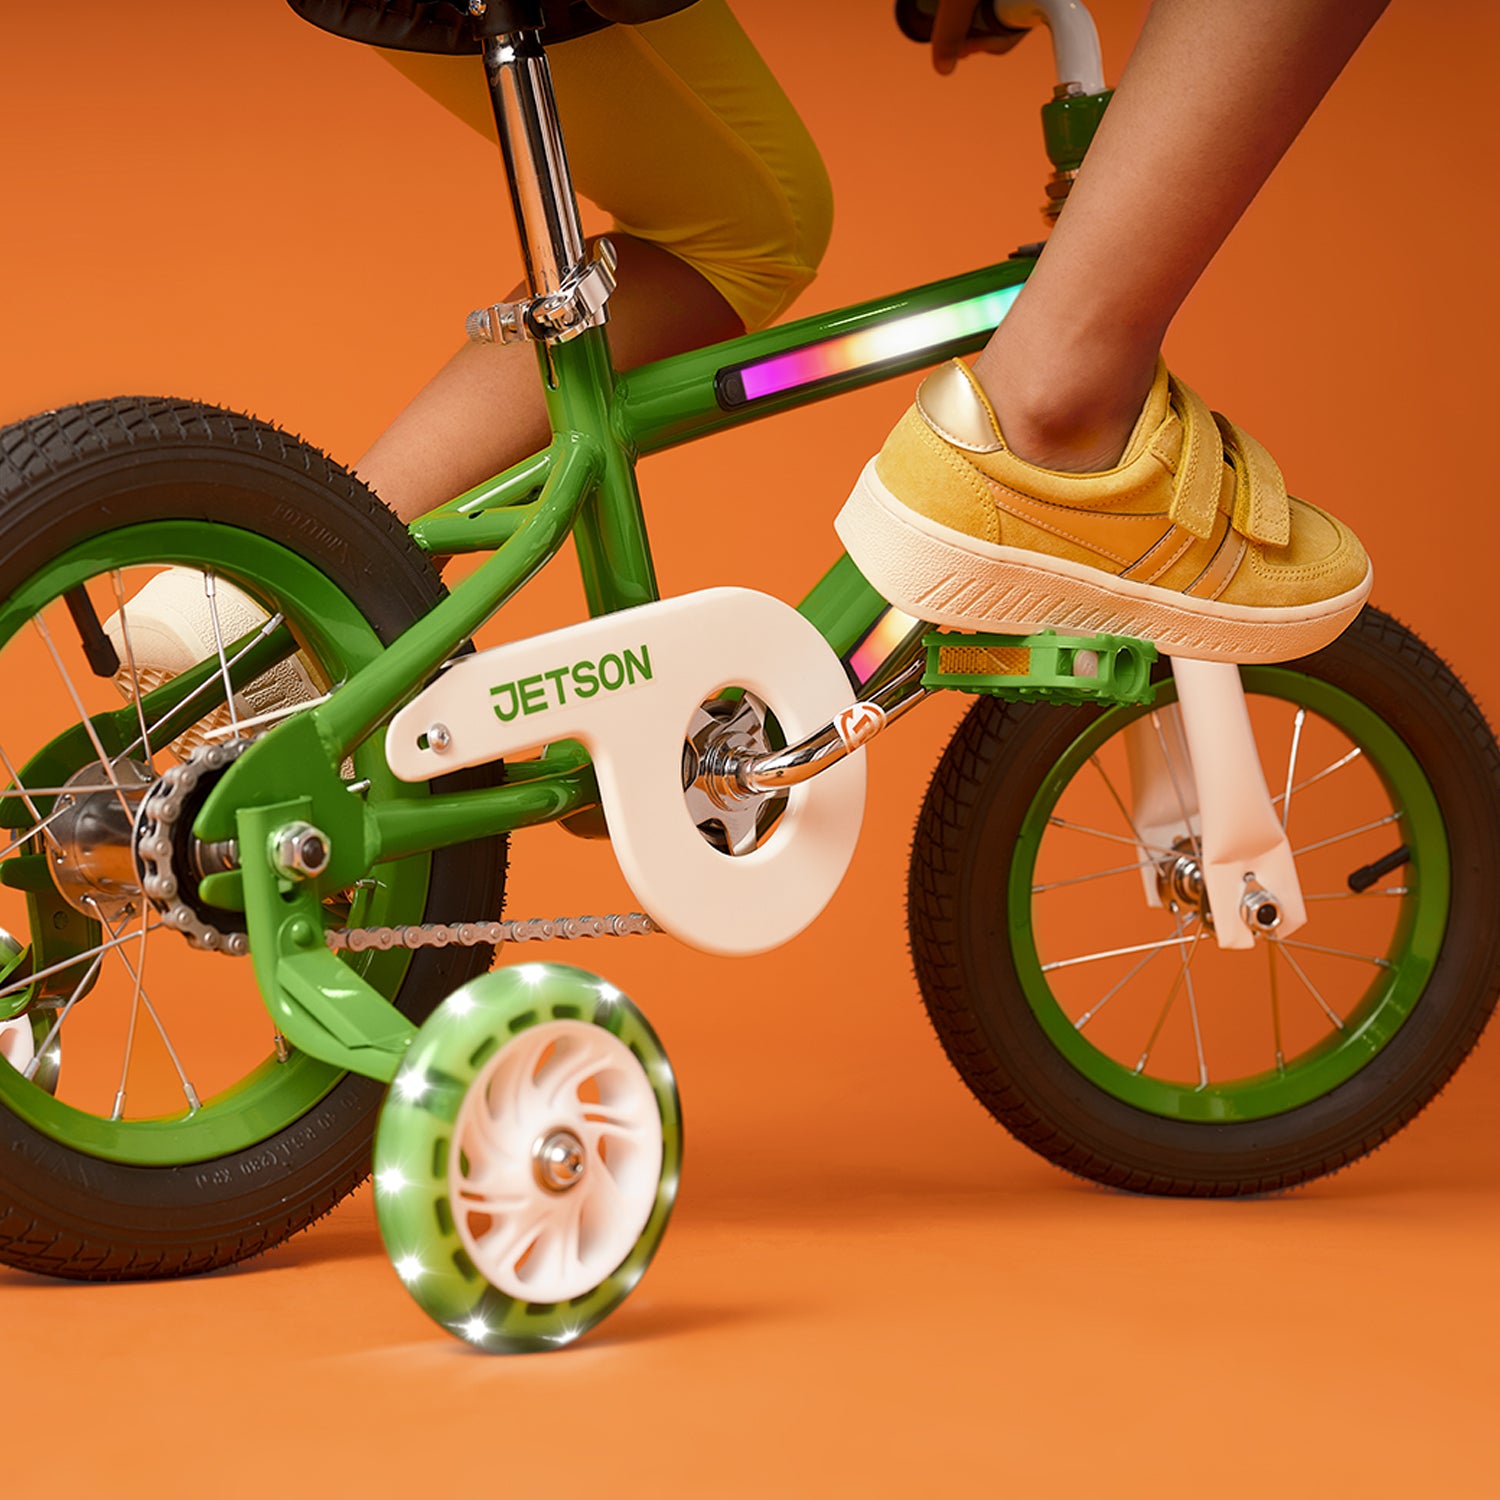 close up of a kid's foot on pedal and light up training wheels